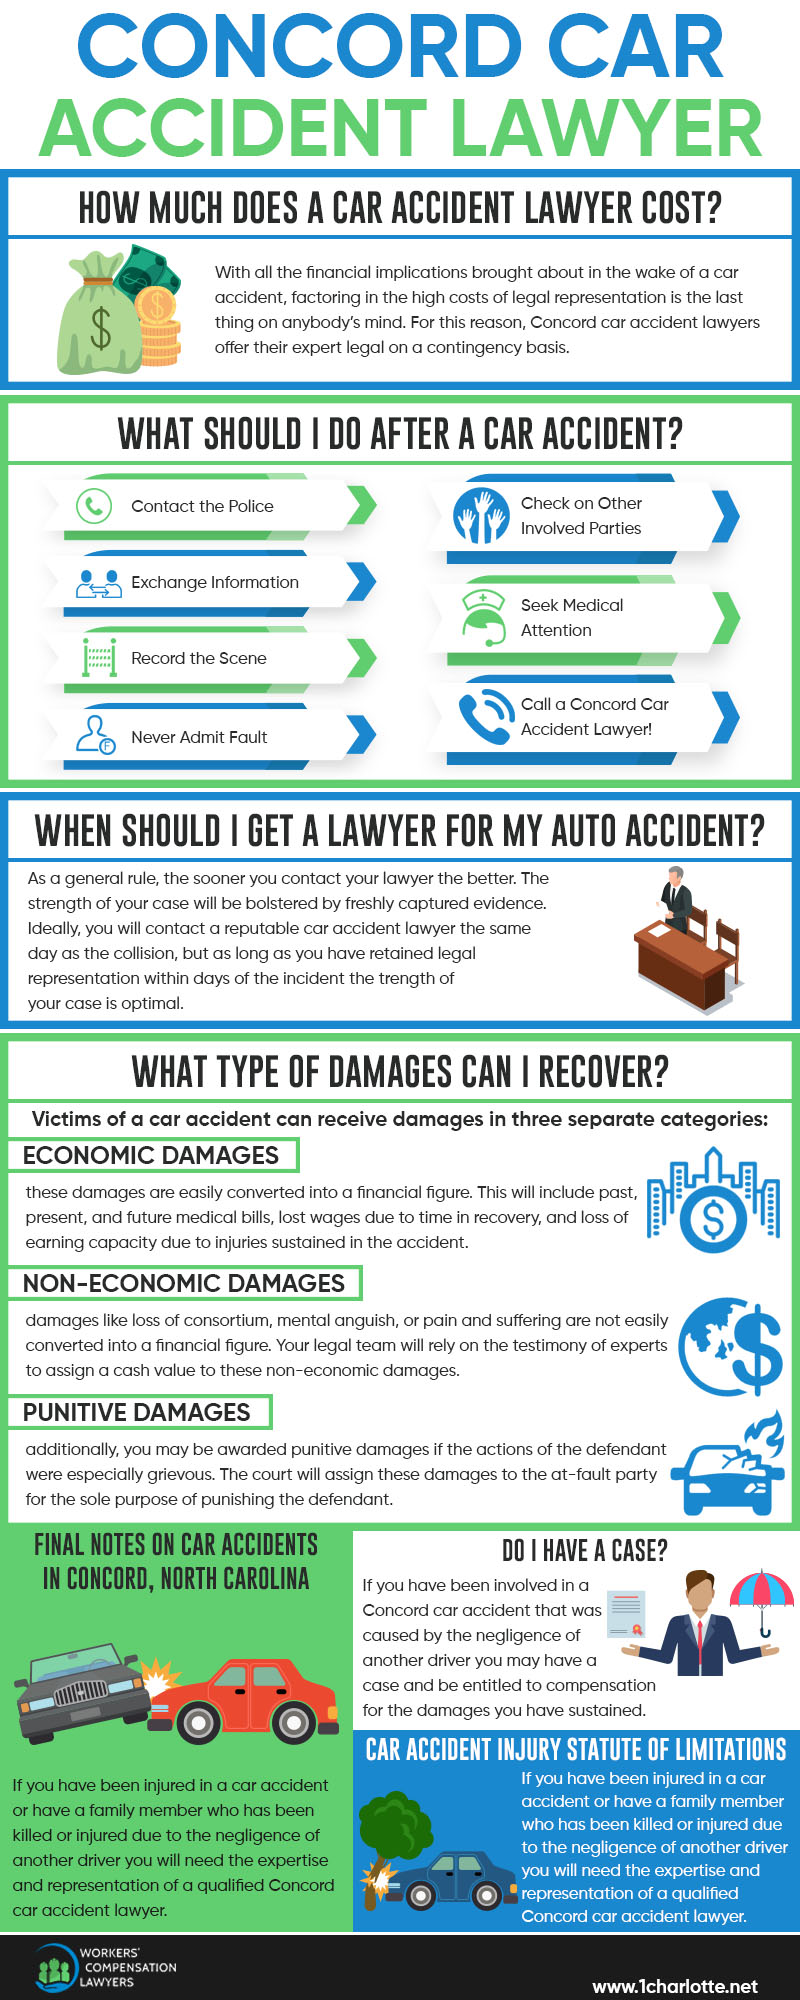 Concord Car Accident Infographic